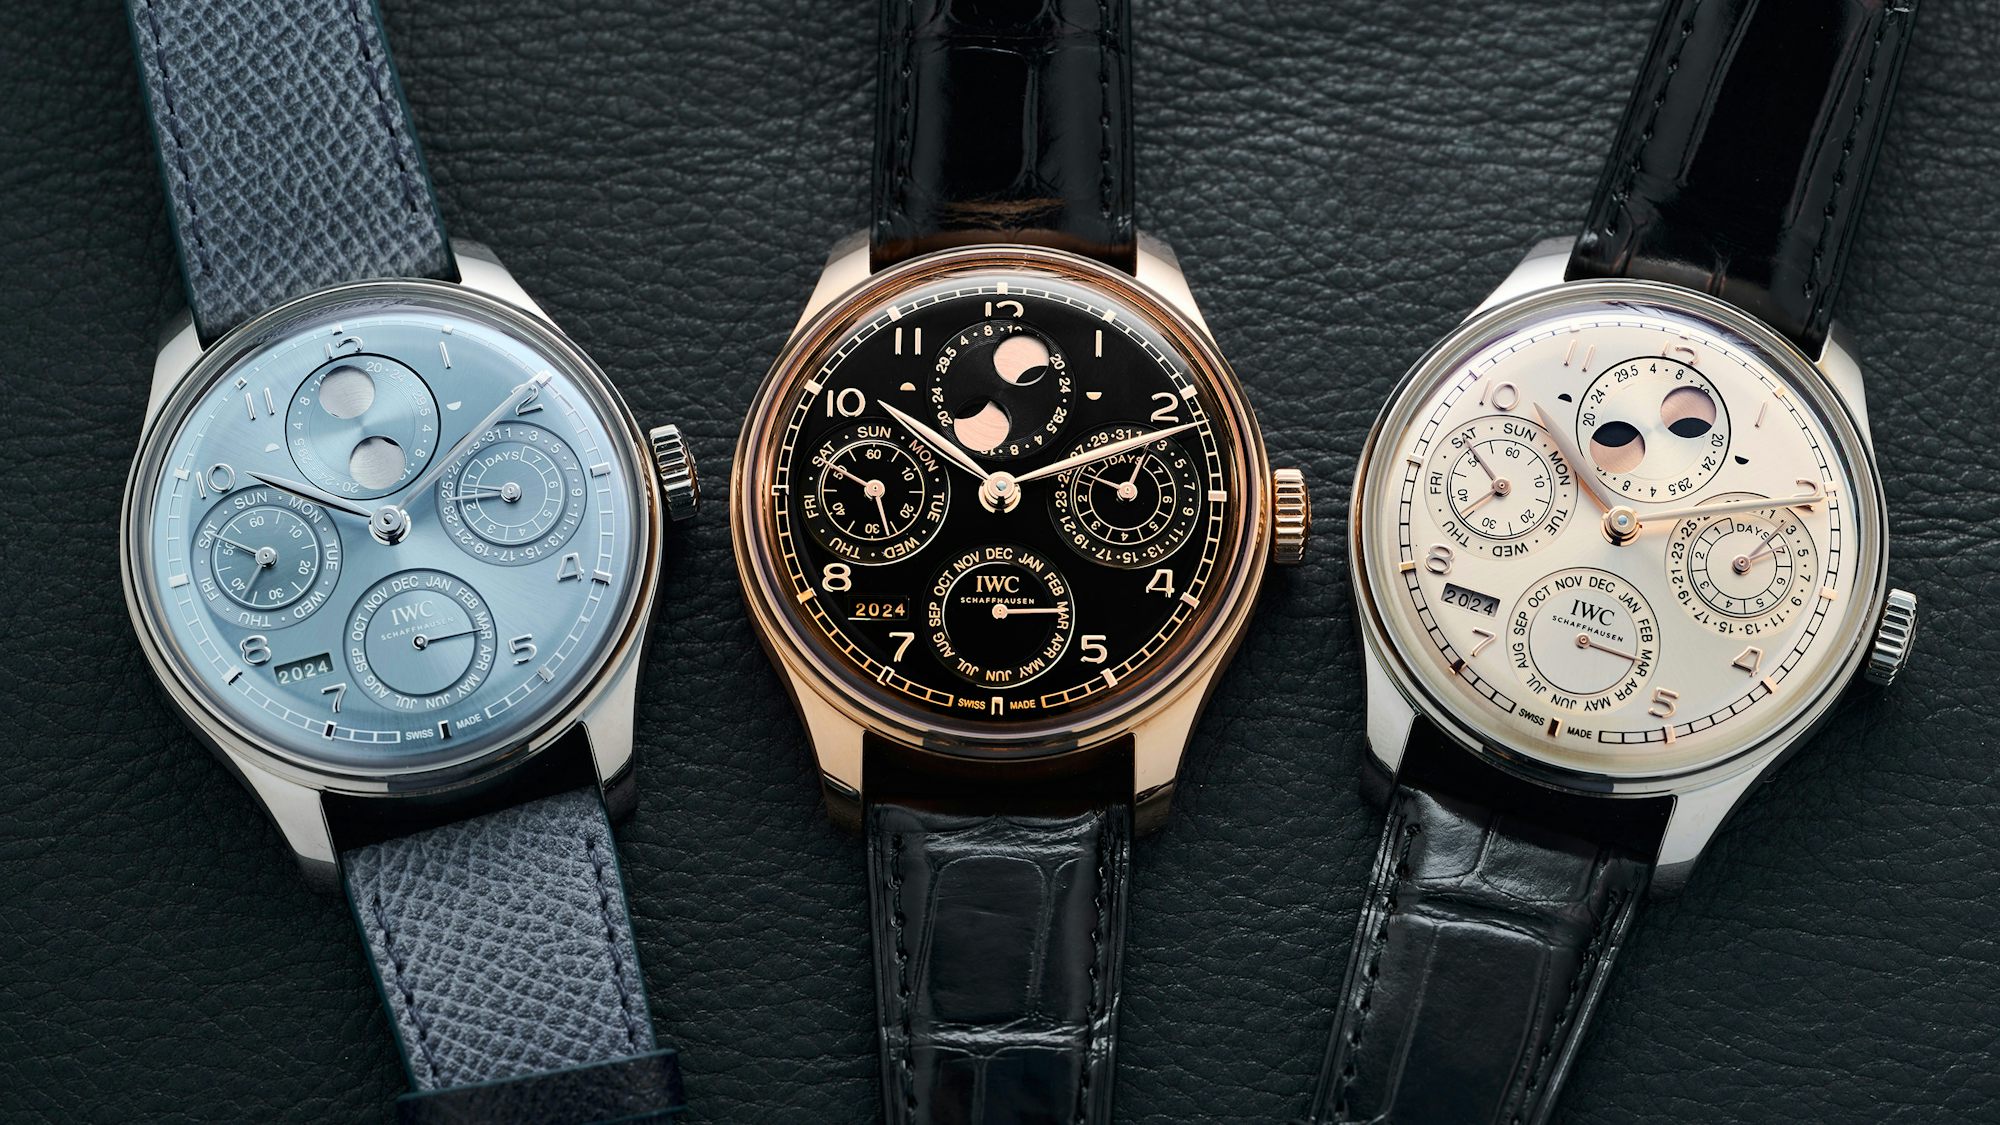 Hands-On: IWC Combines Their Core Design Language With An Updated Case In Their New Portugieser Perpetual Calendar